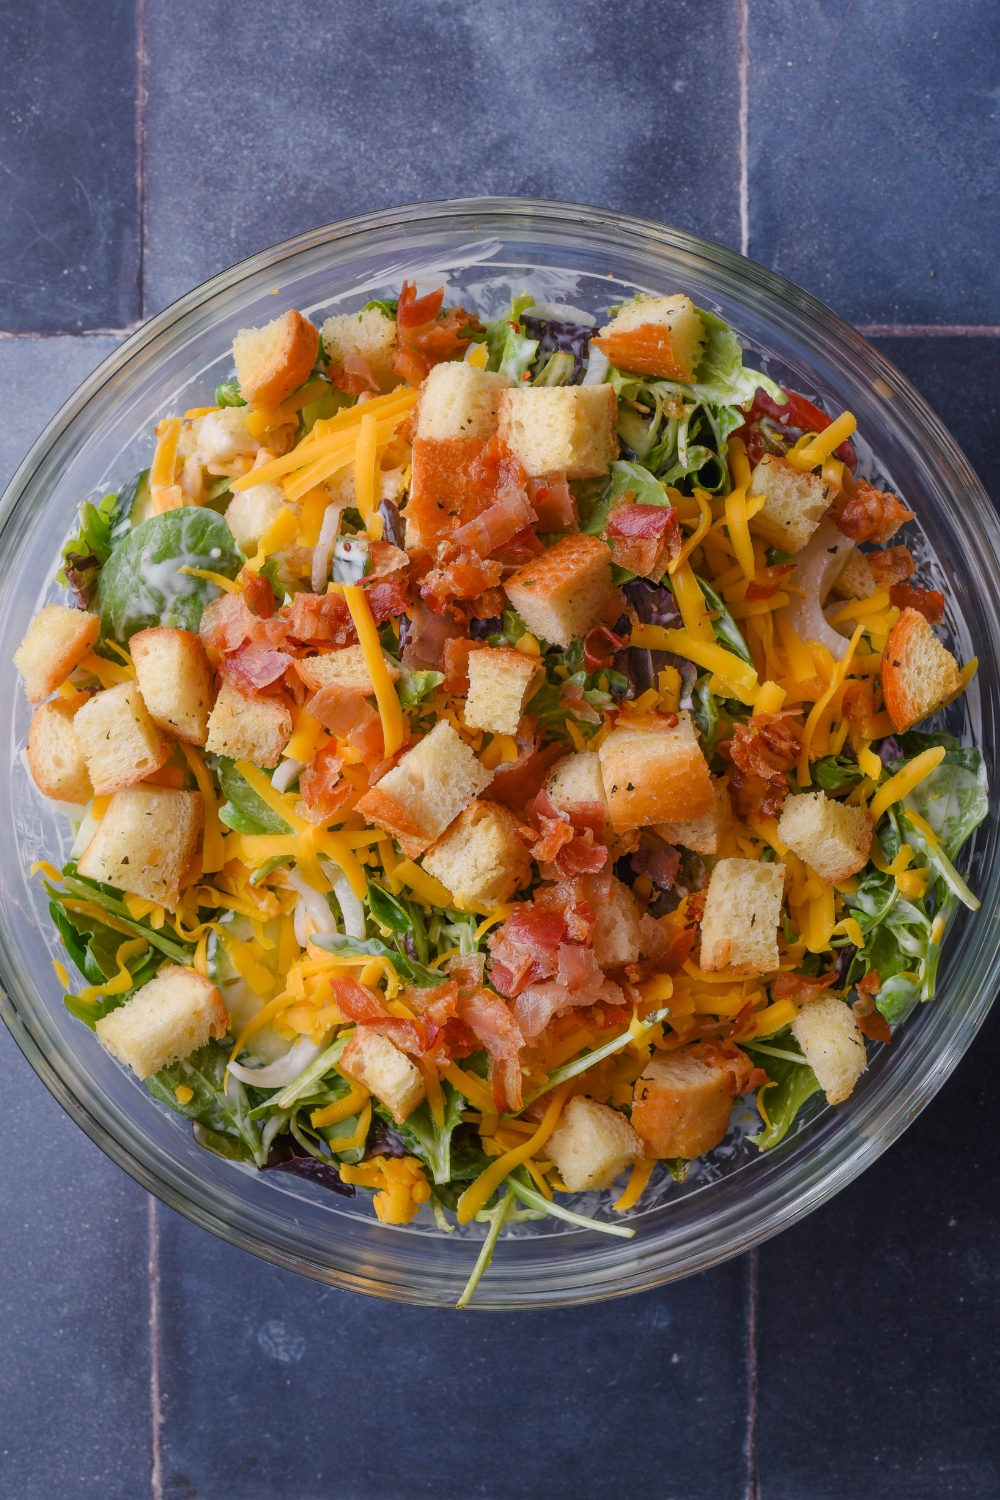 A mixing bowl with a house salad topped with croutons and bacon bits.